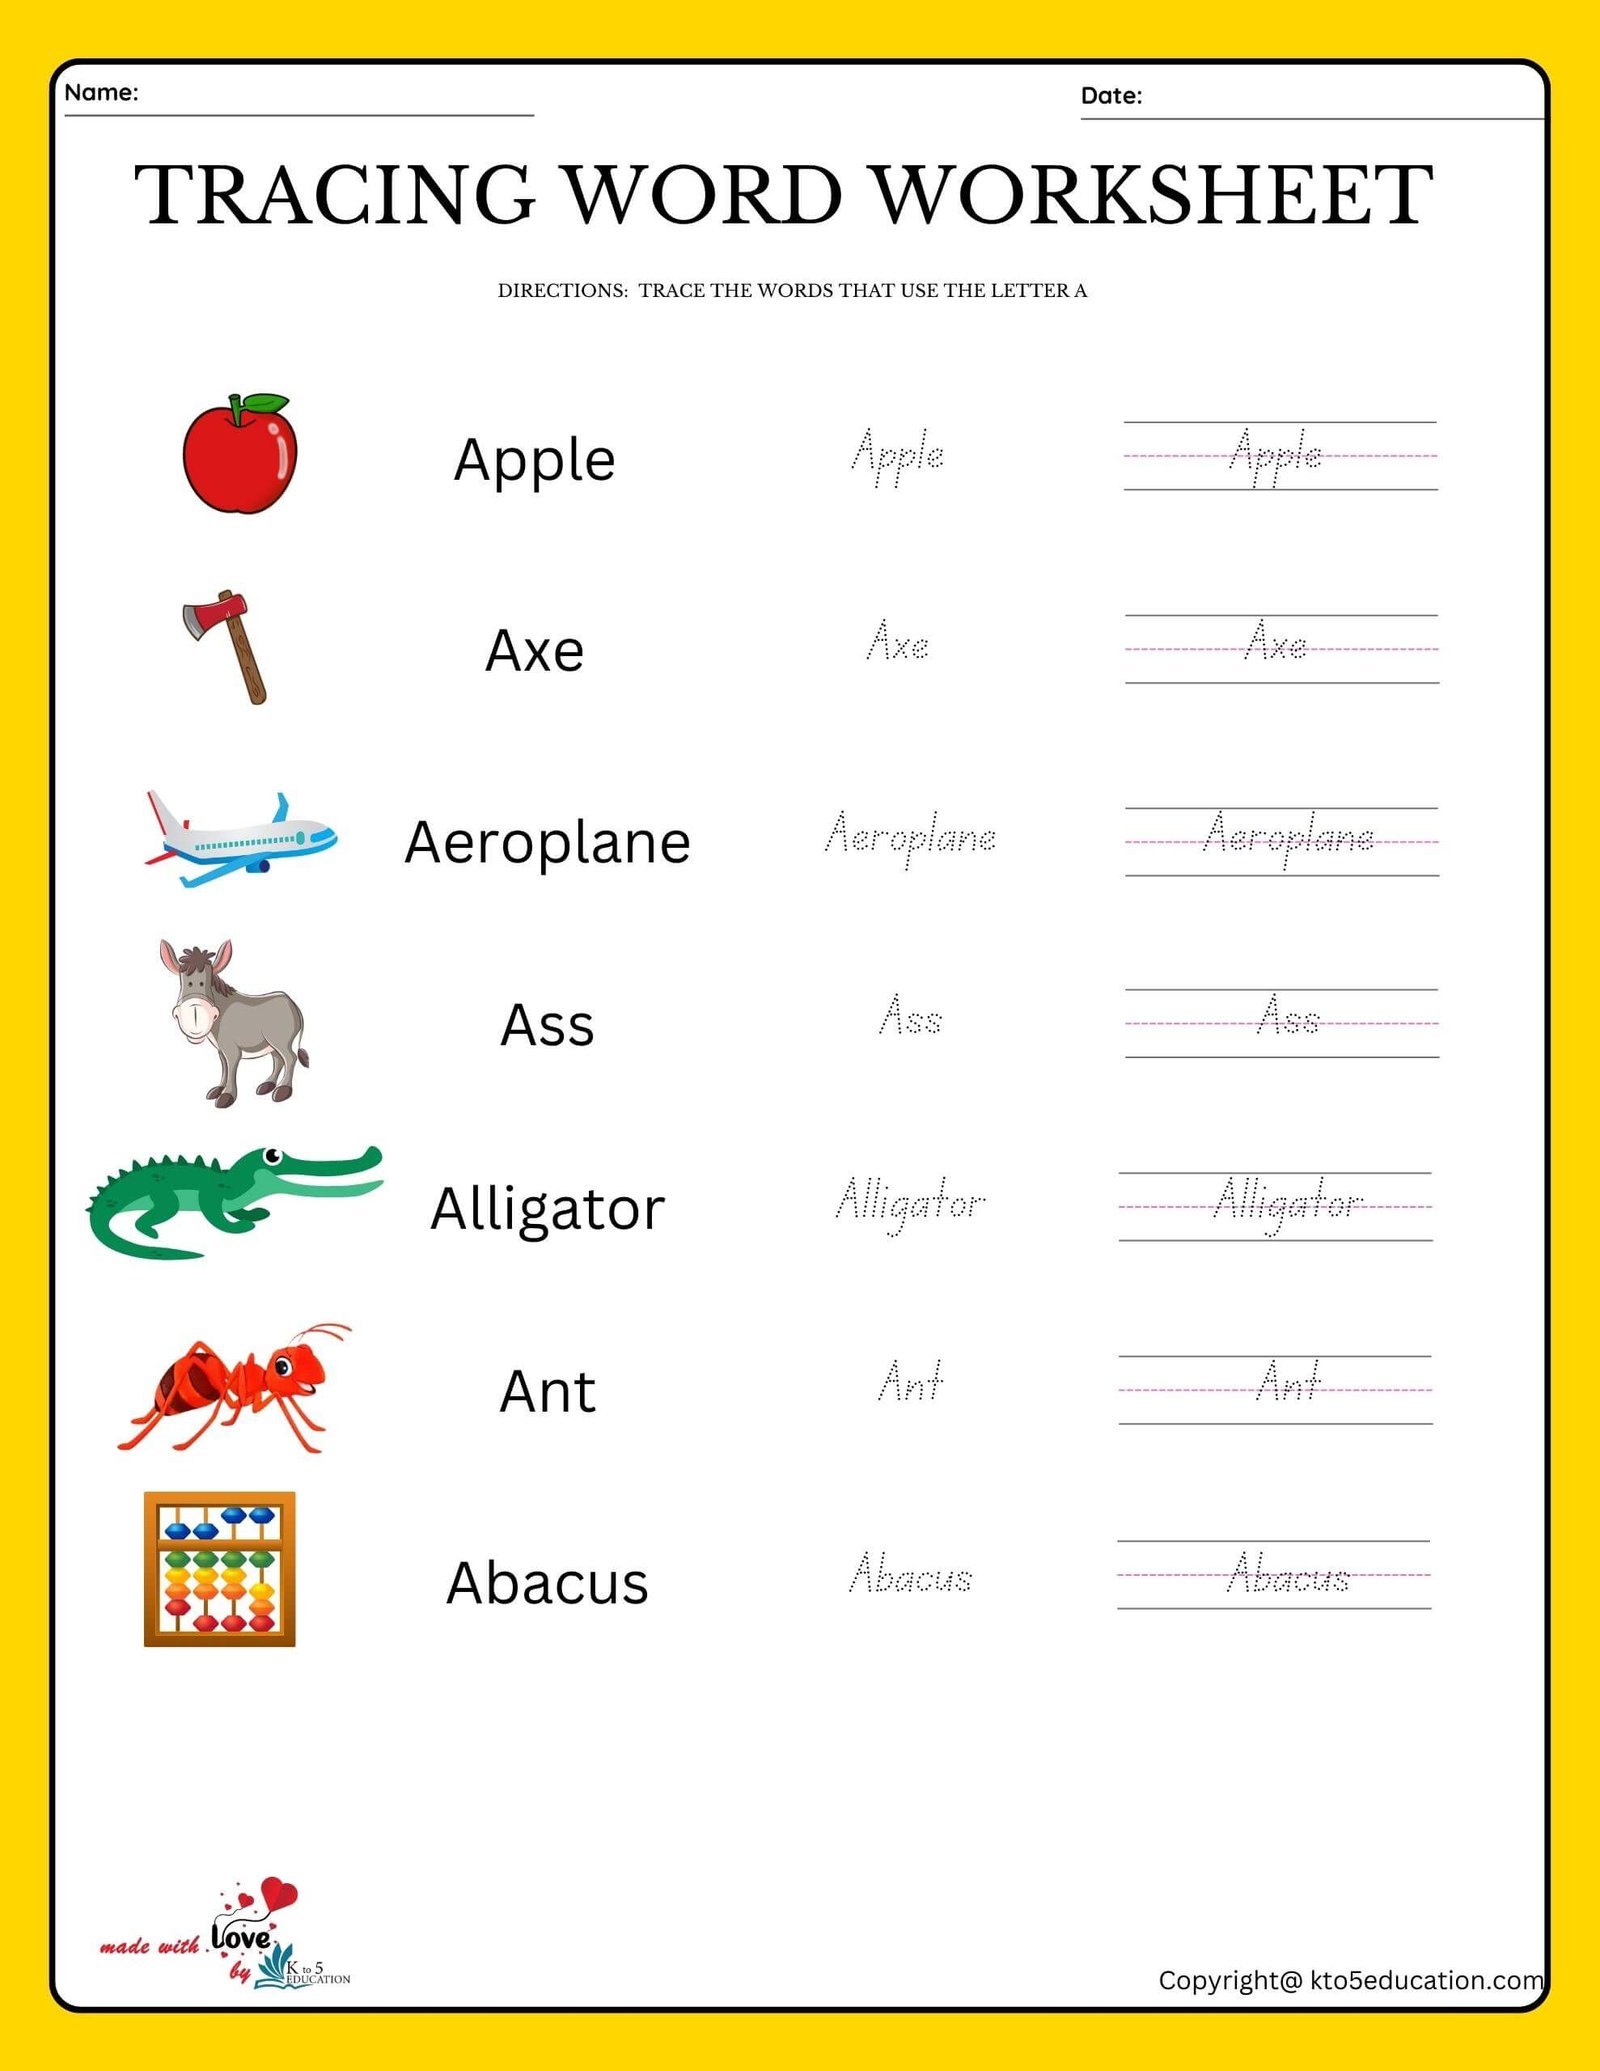 Trace The Words That Use The Letter A Worksheet